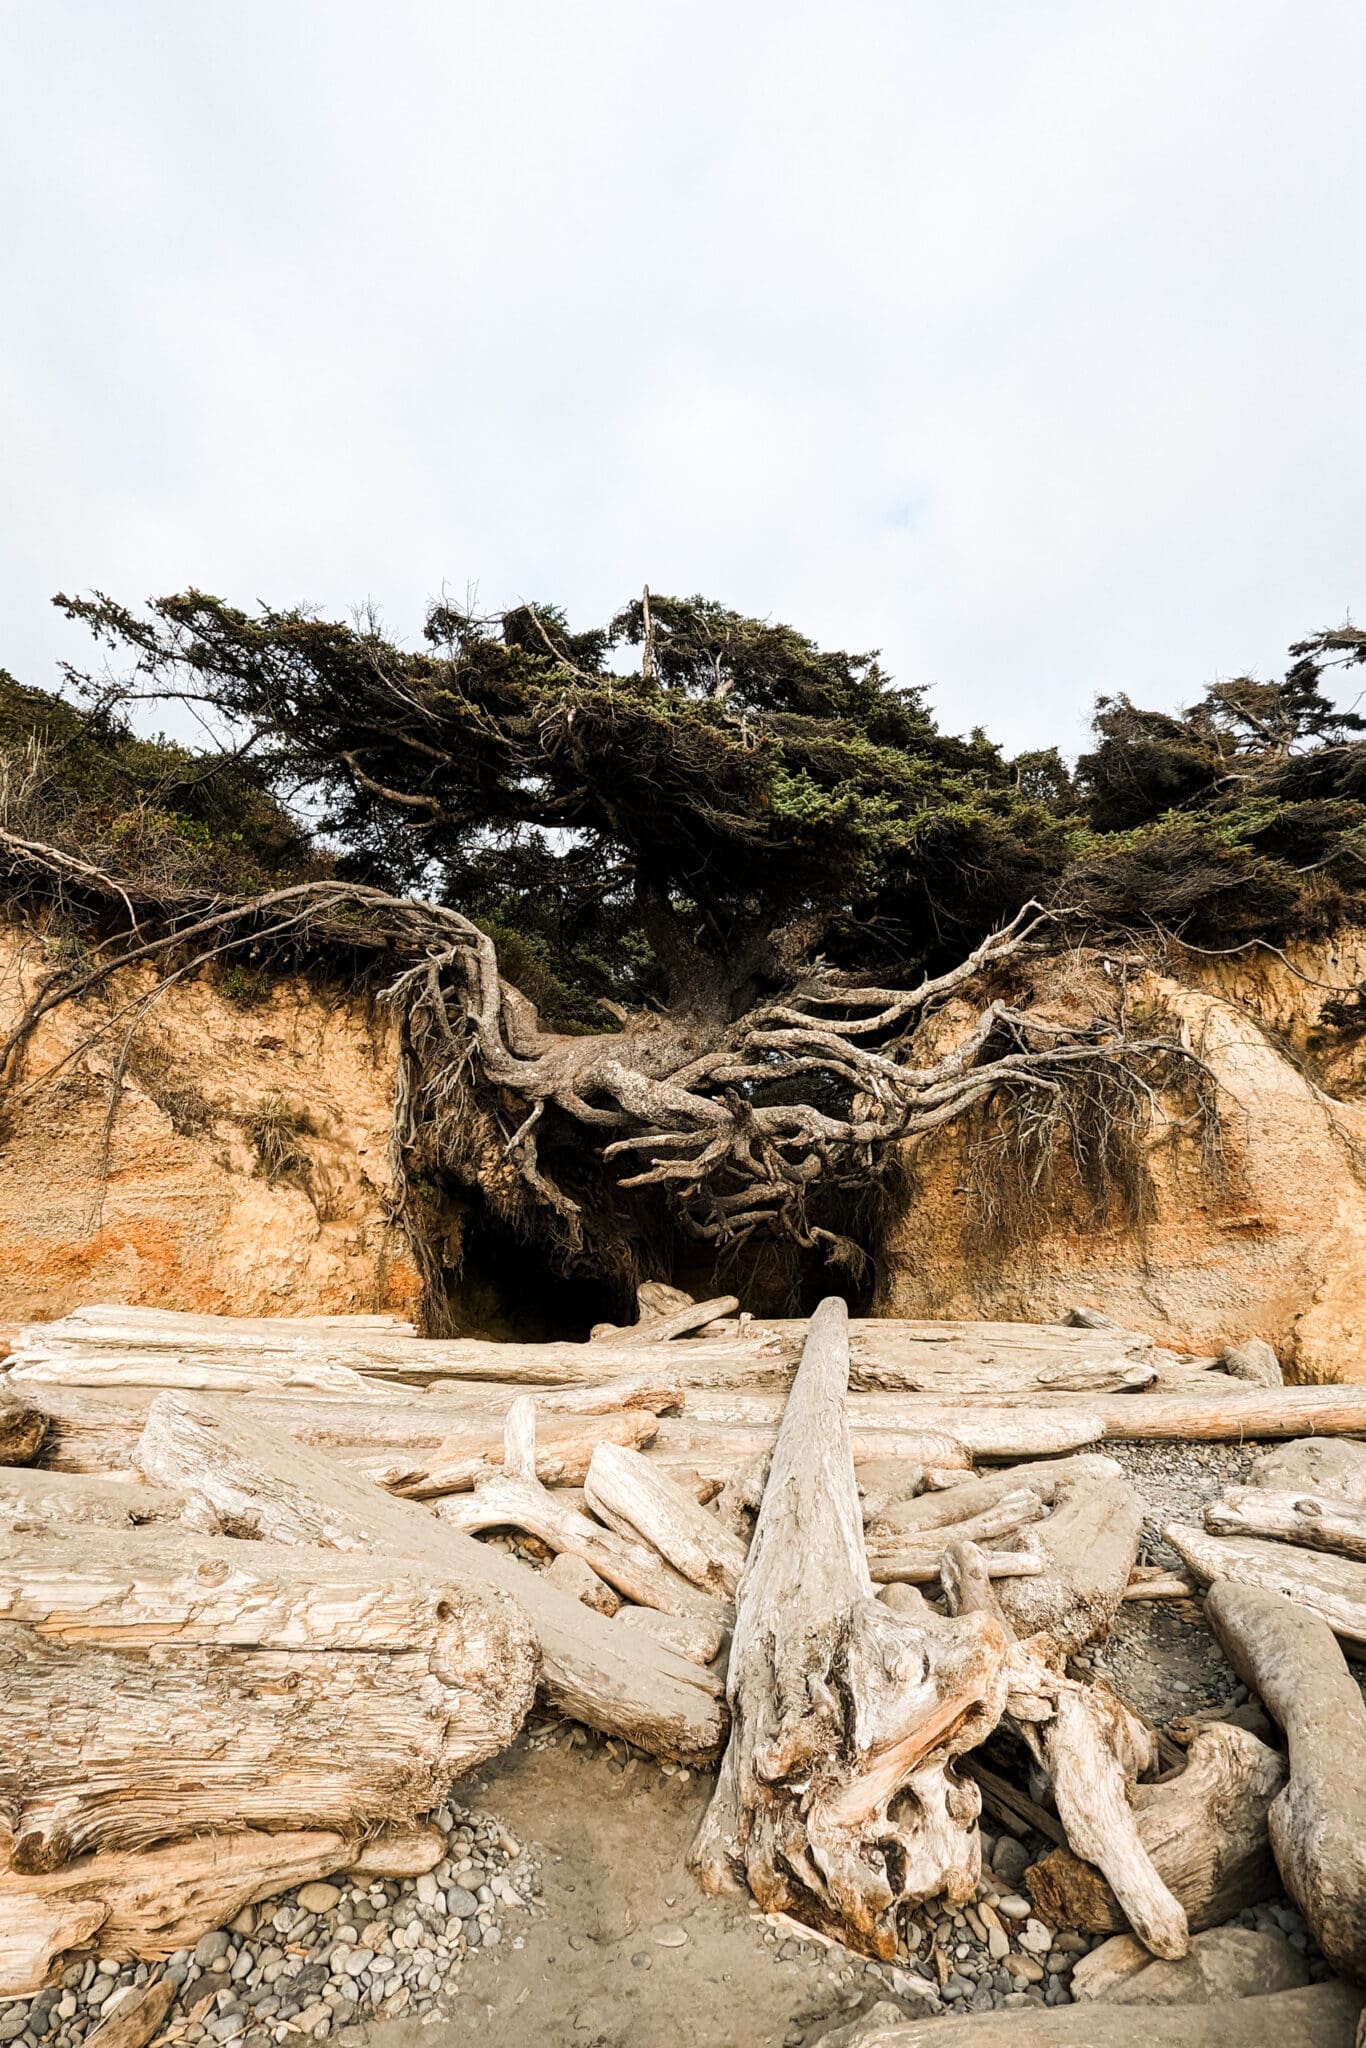 Tree of life surrounded by driftwood